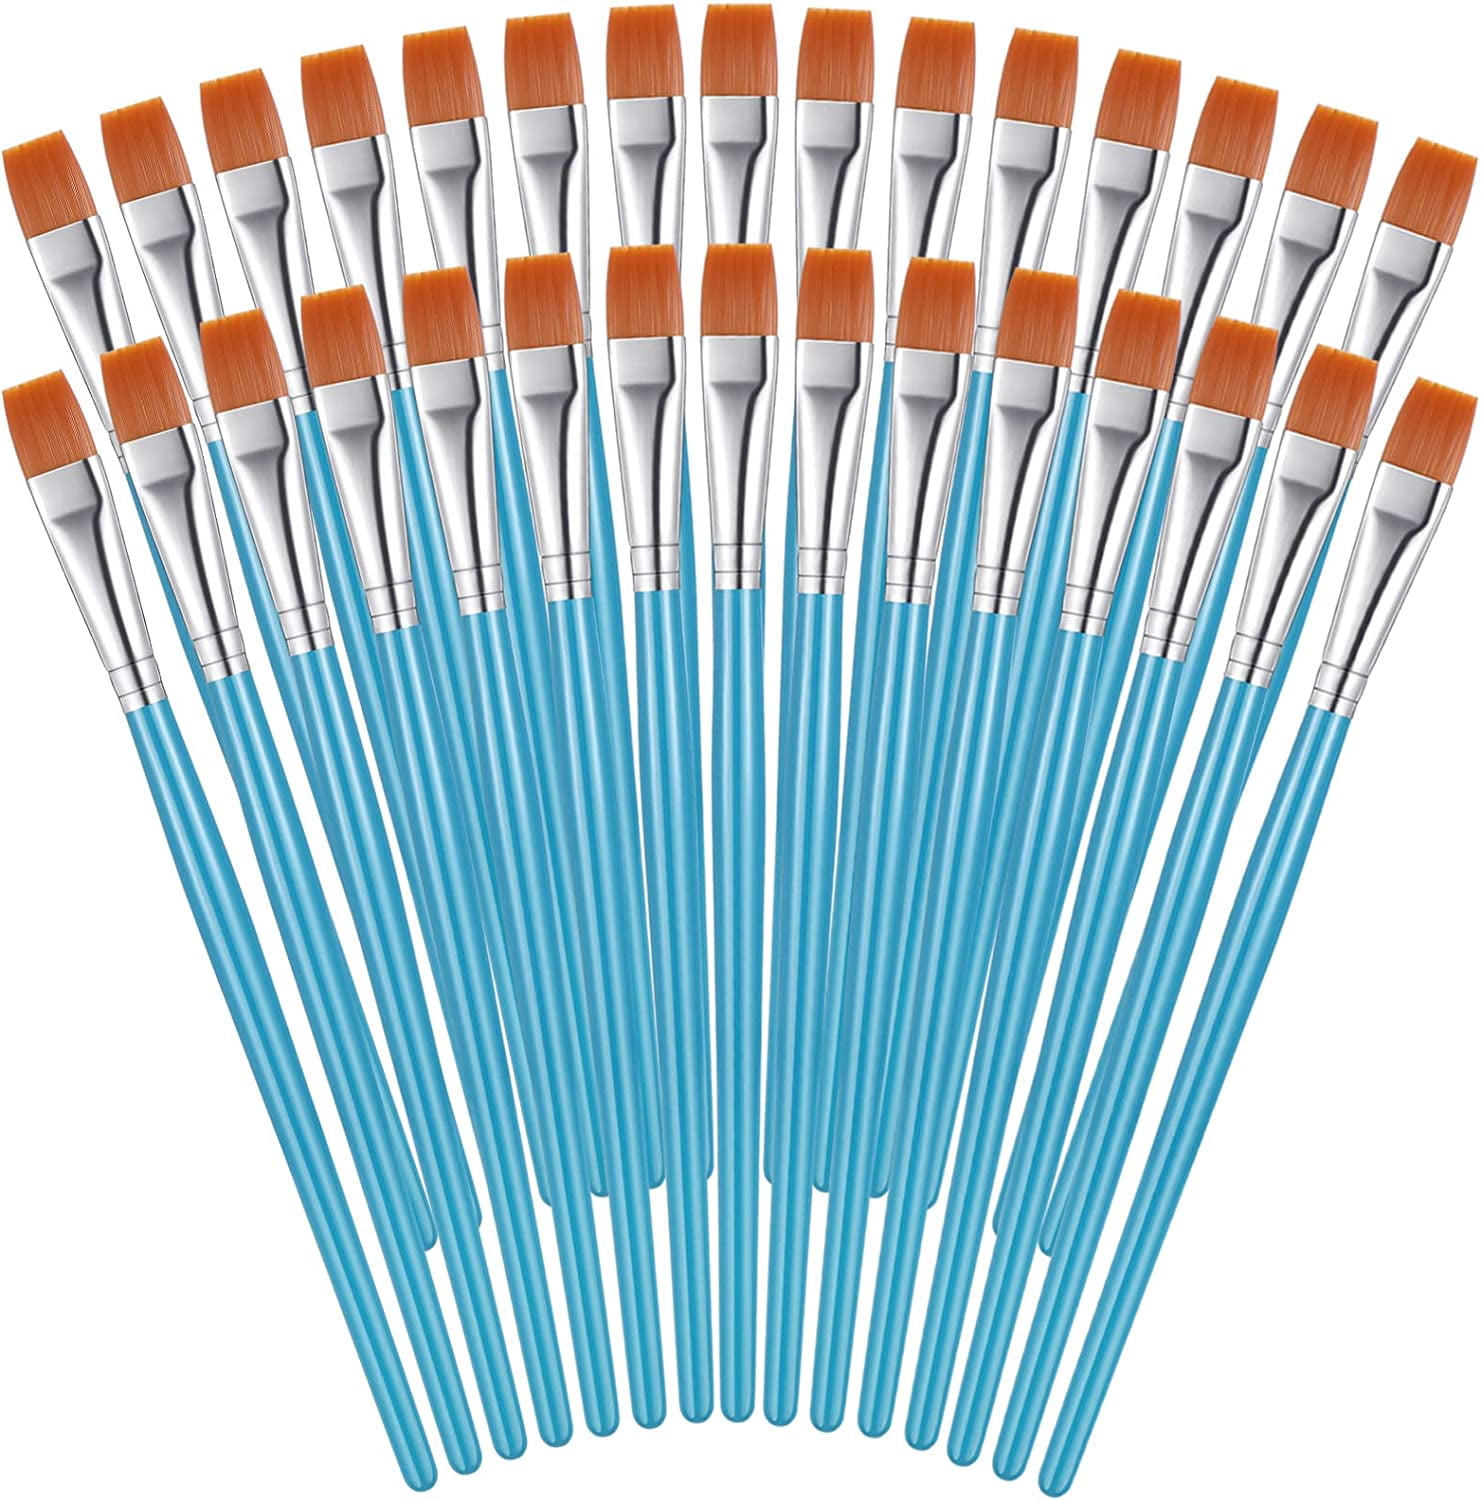 100Pcs Small Paint Brushes Bulk, Anezus Flat Top Acrylic Paint Brushes  Classroom Brush for Kids Mini Paint Brushes for Touch Up Crafts Detail  Painting